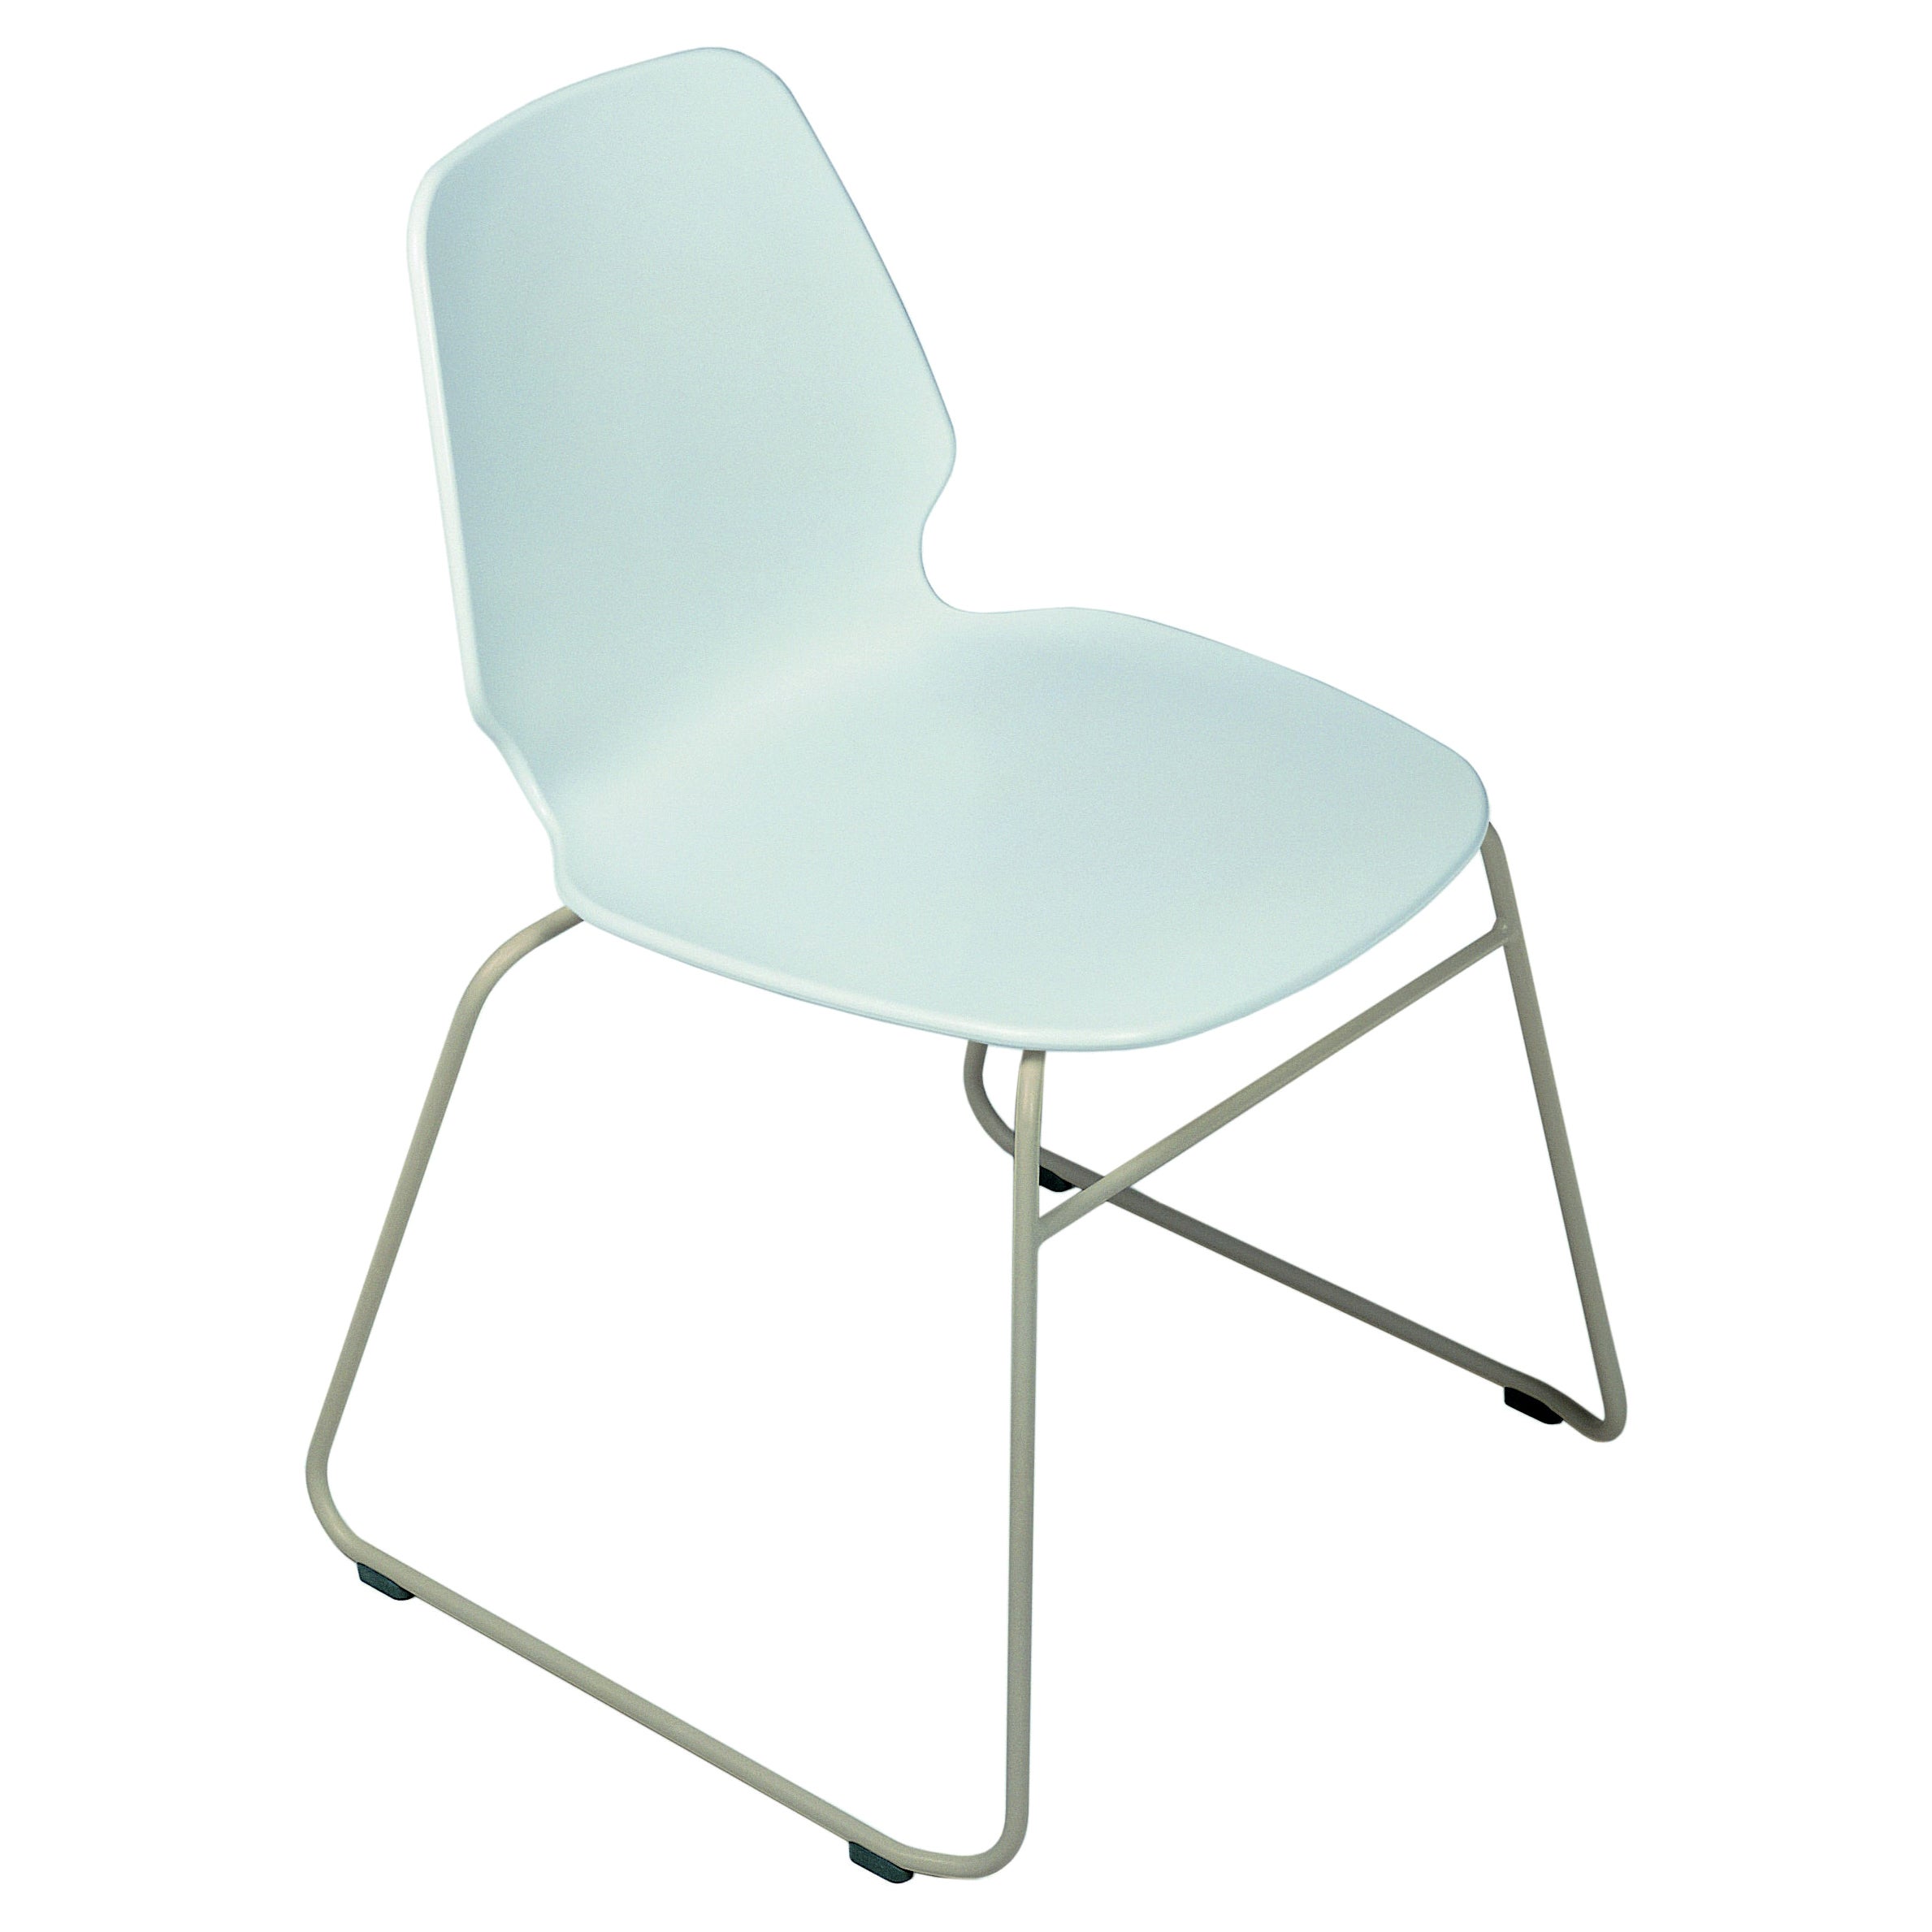 Alias 531 Selinunte Sledge Chair in White Seat and Sand Lacquered Steel Frame